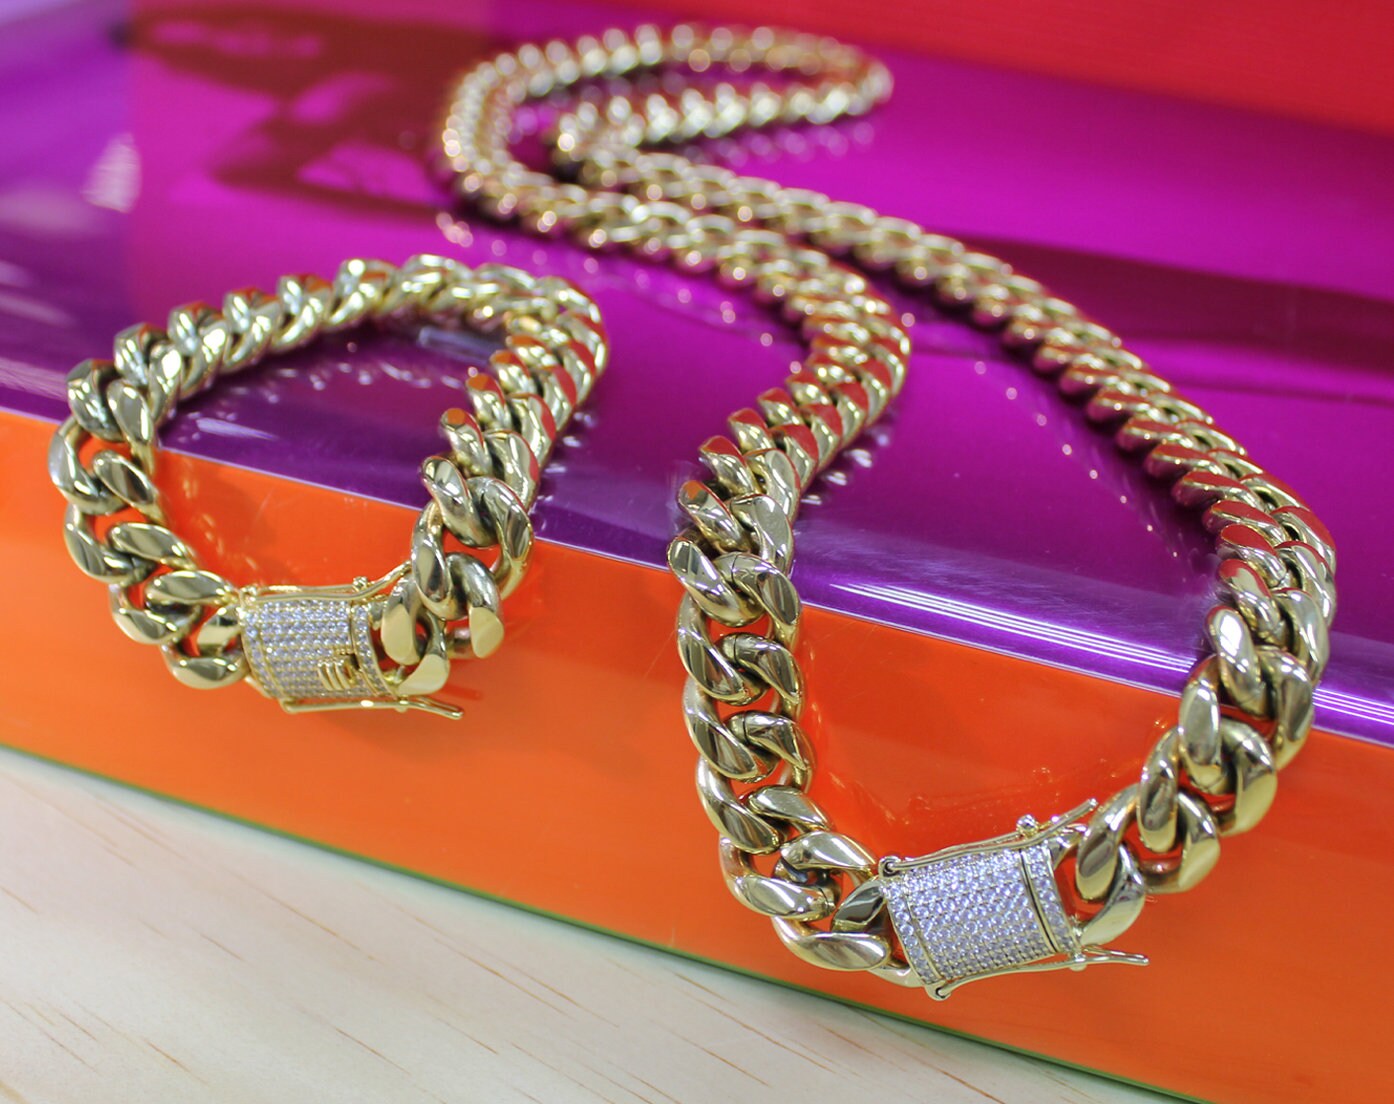 14K Gold Filled 10mm Cuban Link Chain Wholesale 26 Inches